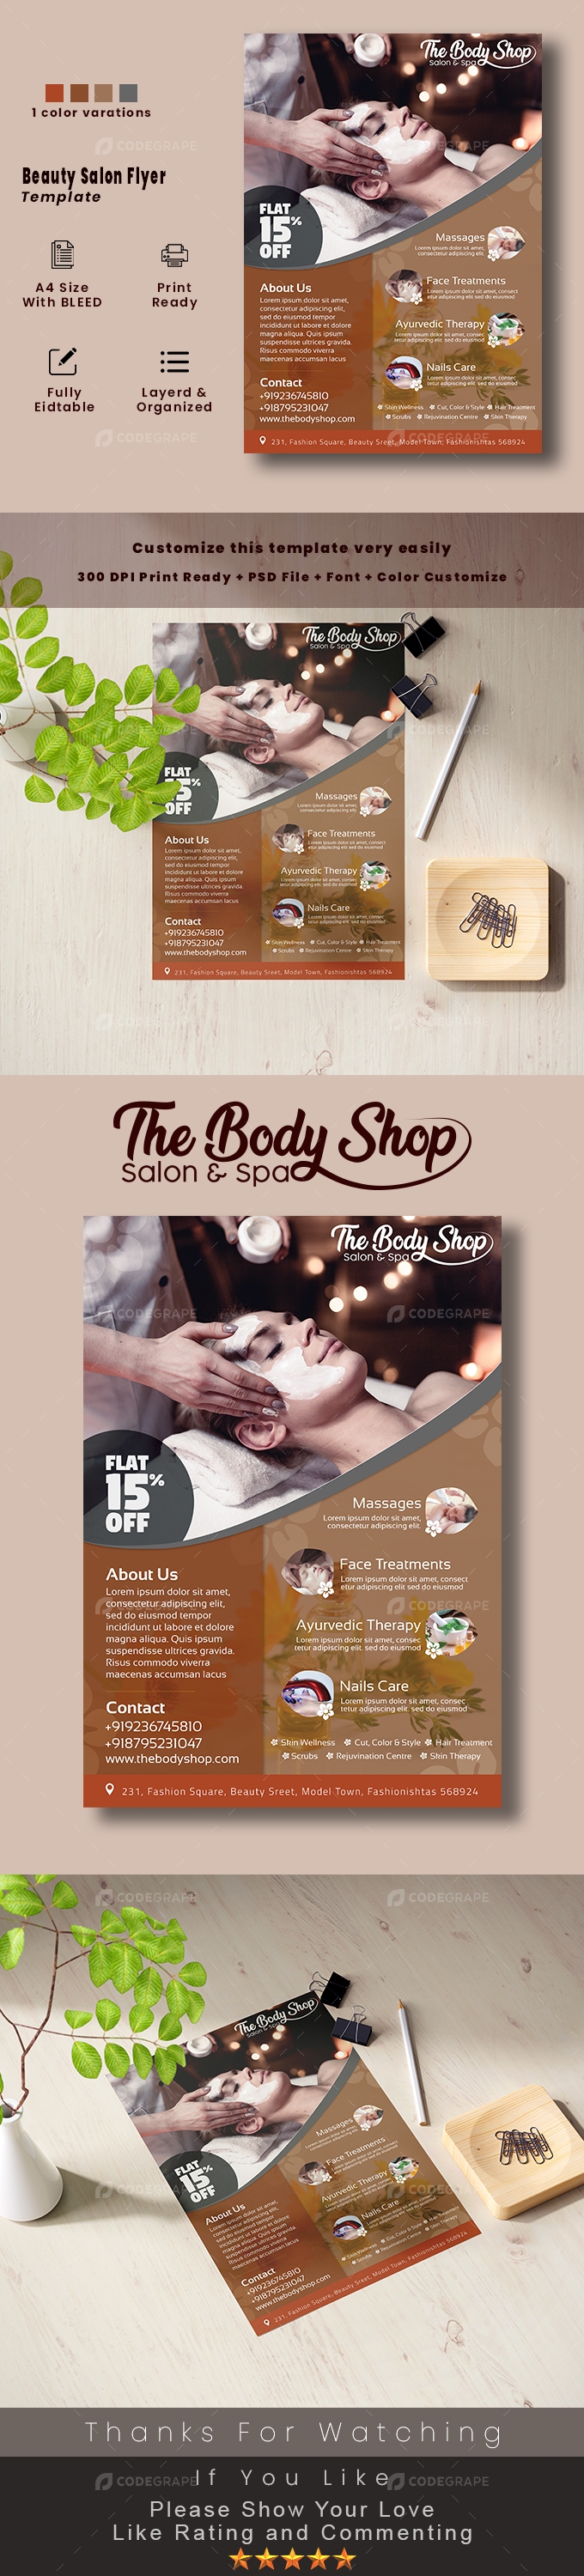 The Body Shop Salon and Spa Flyer Template